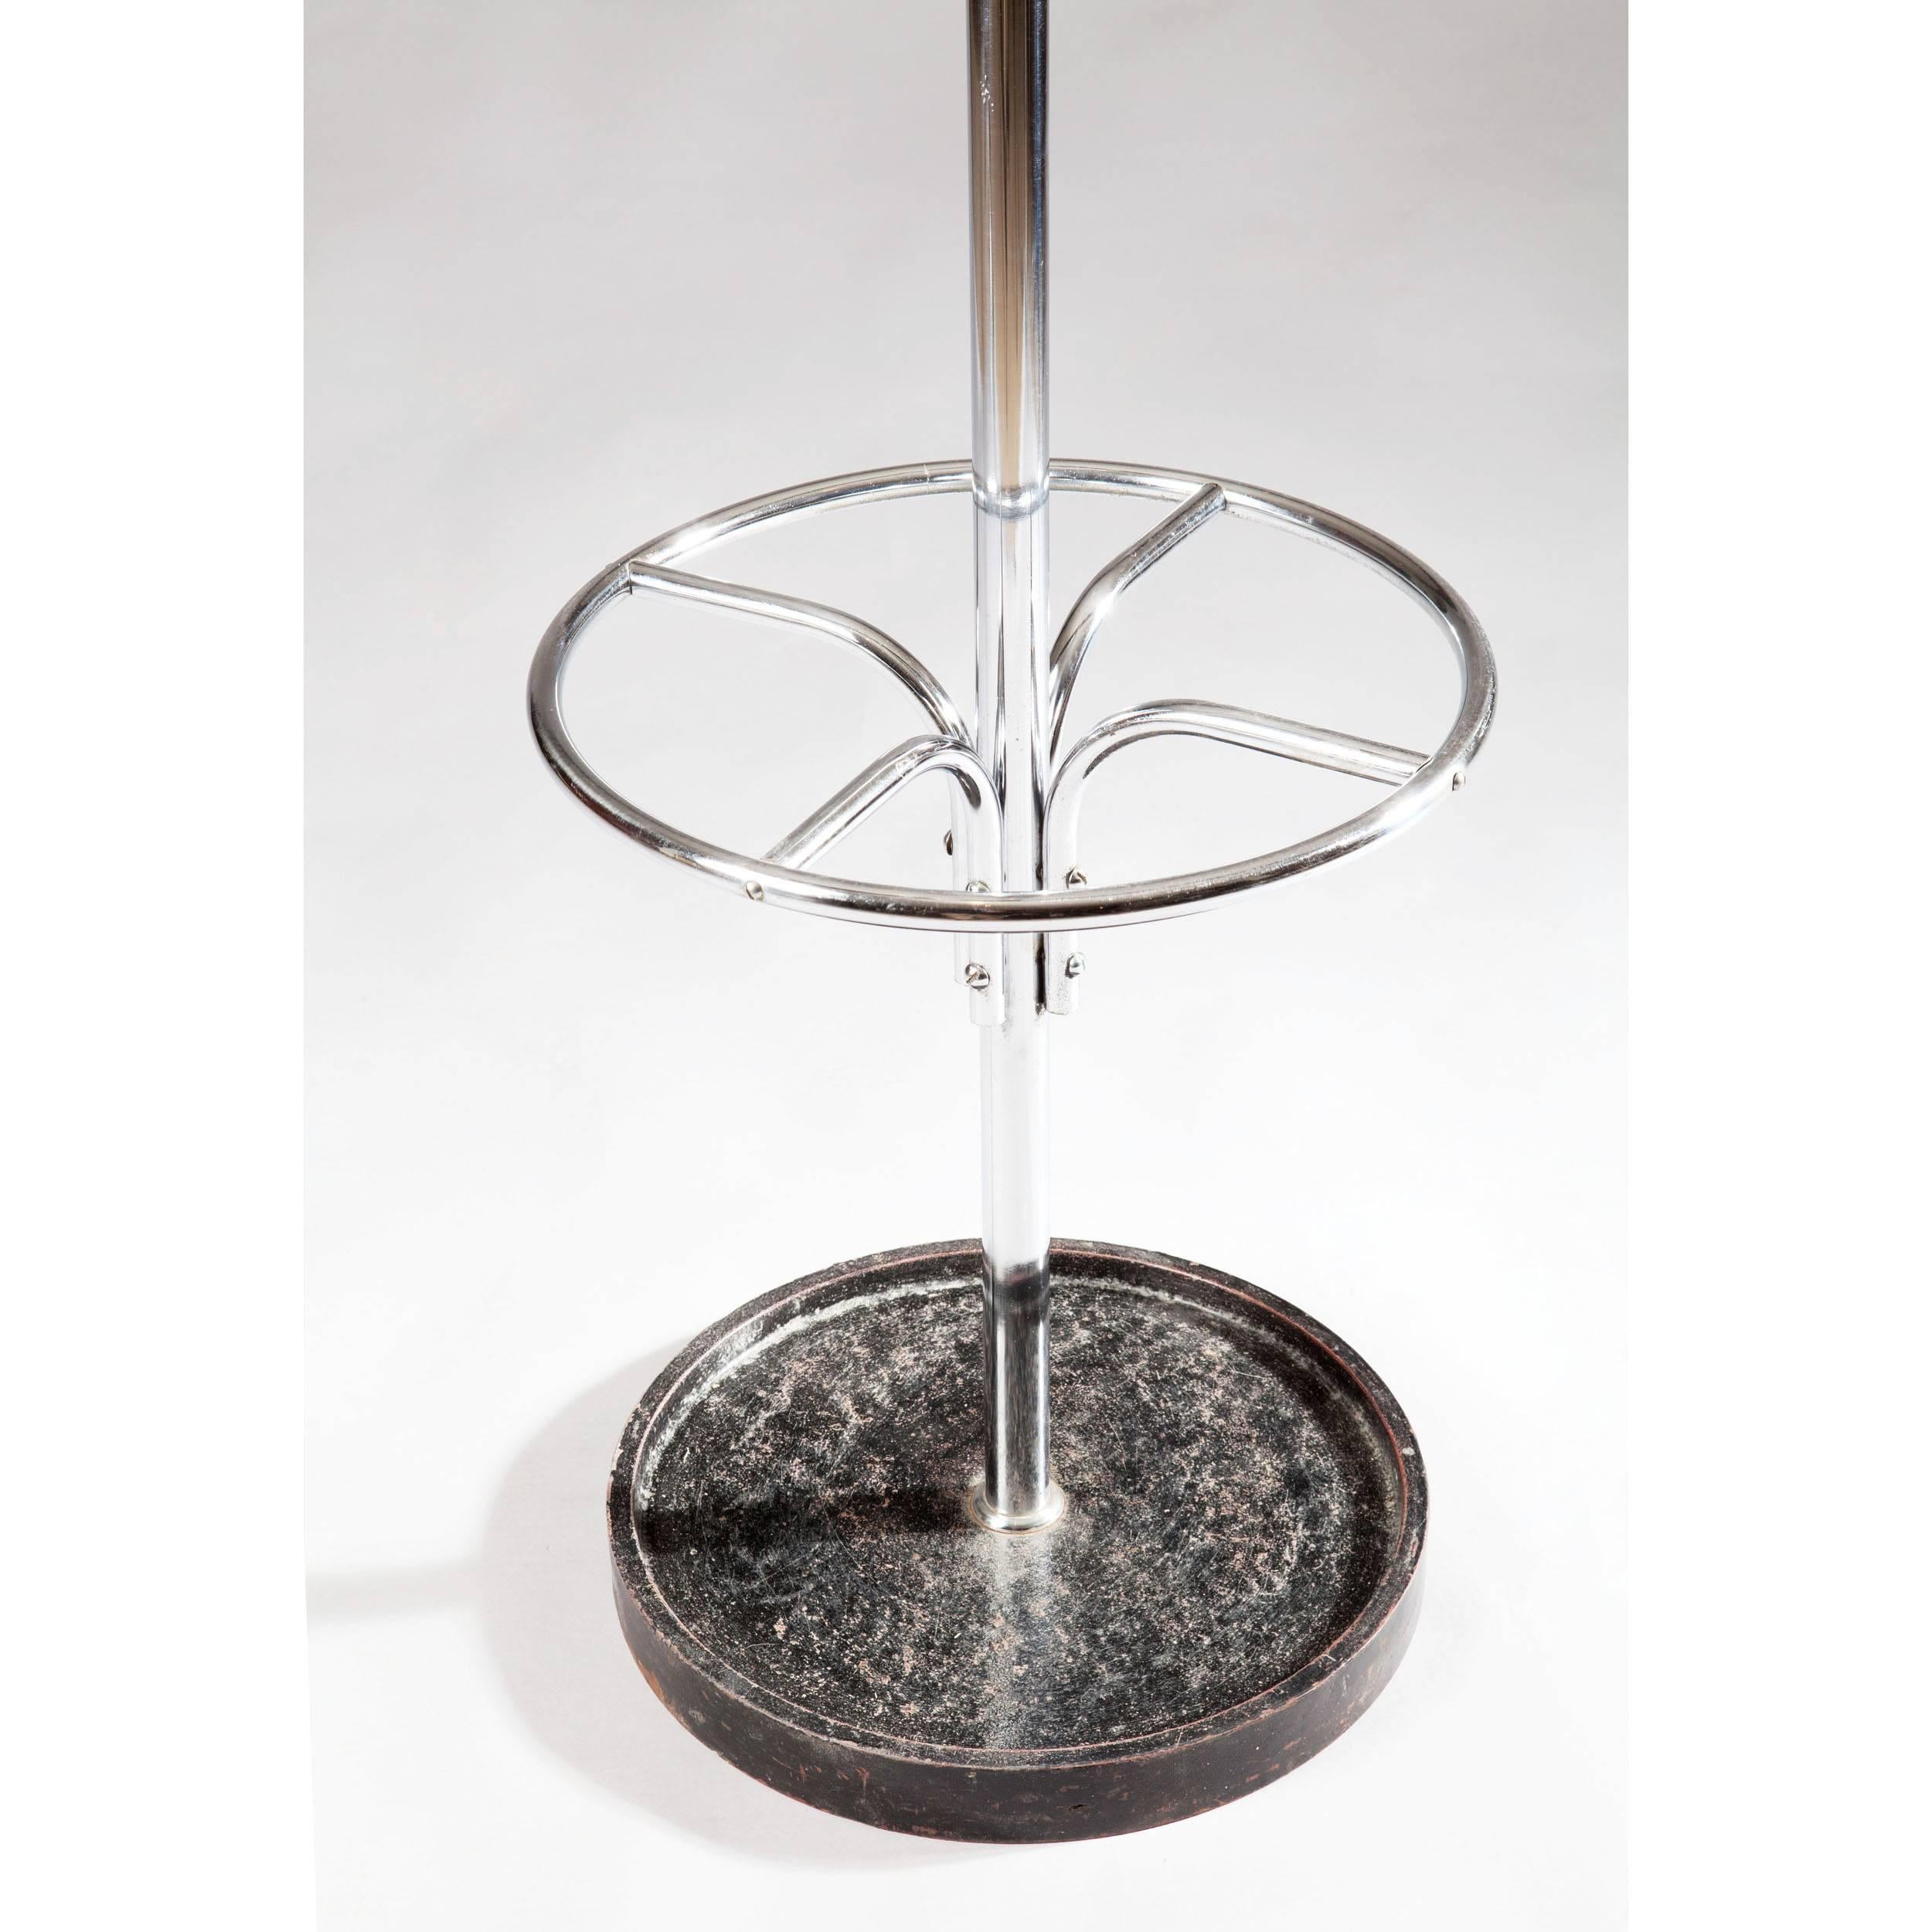 England, circa 1960.

A very decorative Mid-Century chrome-plated hall stand with accommodation for hats, coats and umbrellas, the whole on a black painted cast iron base.

Measures: Height 171 cm.
Diameter 65 cm.